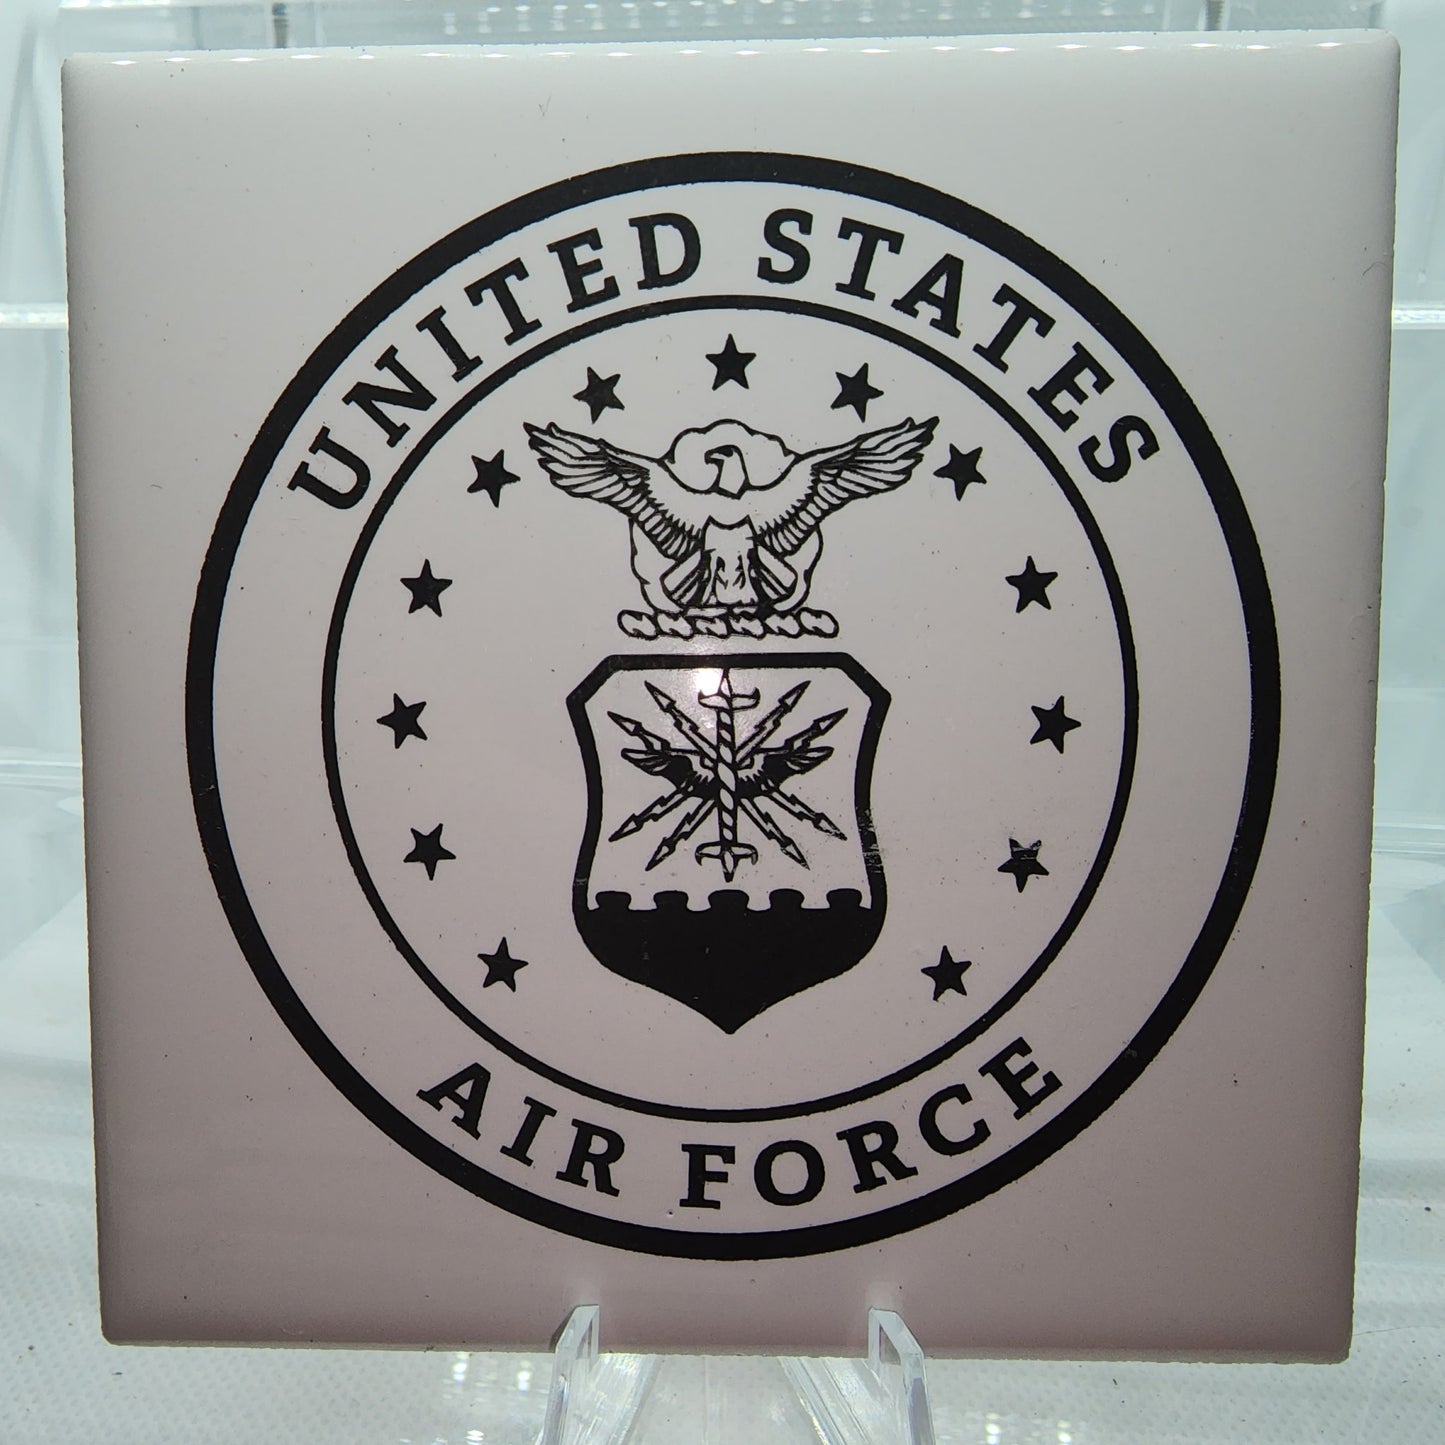 Coaster Set - US Air Force Collection